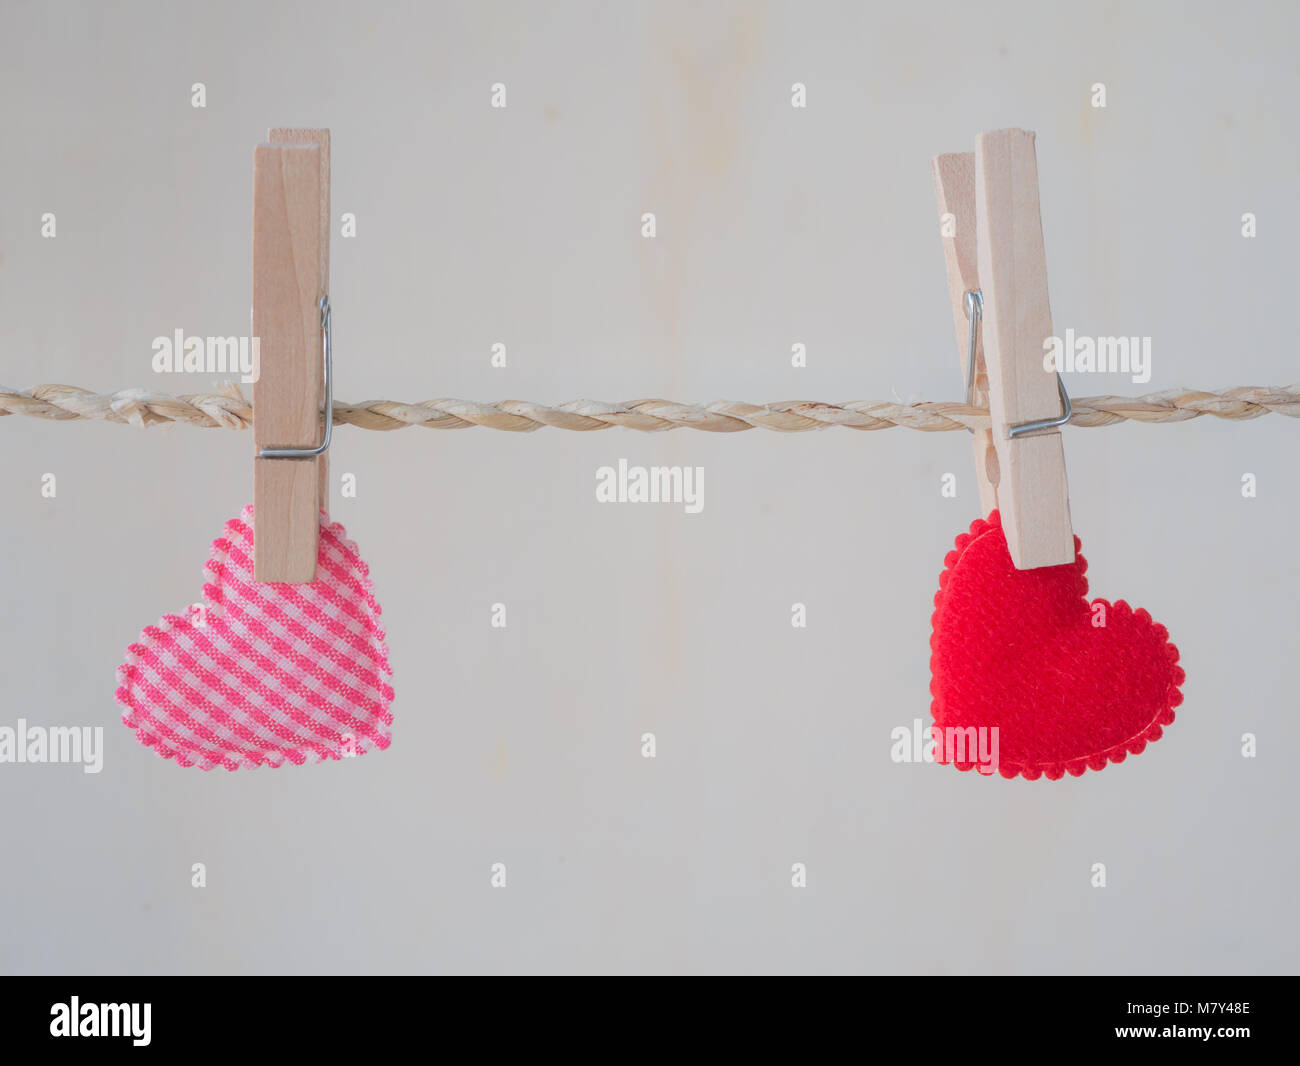 Pink heart pattern and red heart attached to a clothesline with pin on white background, Stock Photo